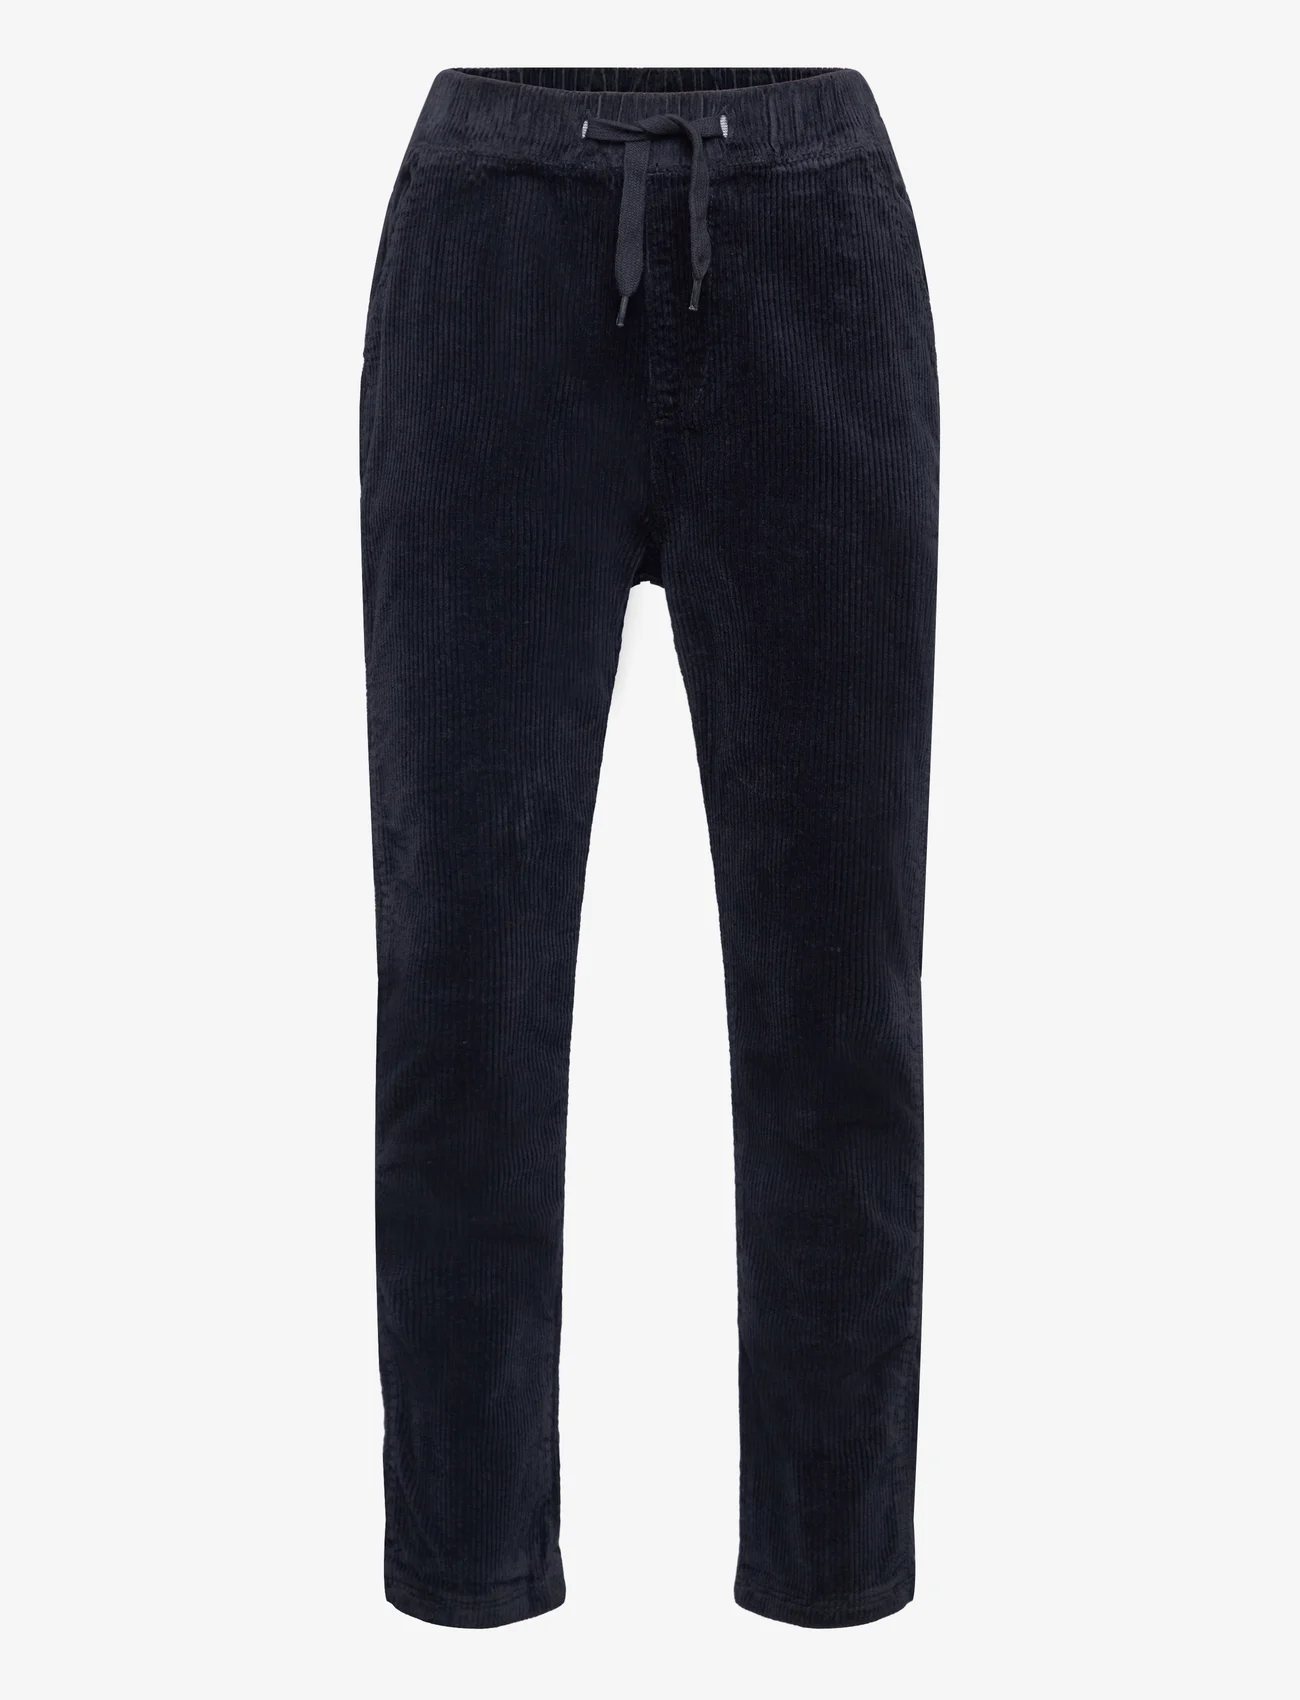 Hust & Claire - Thore - Trousers - lowest prices - blue night - 0